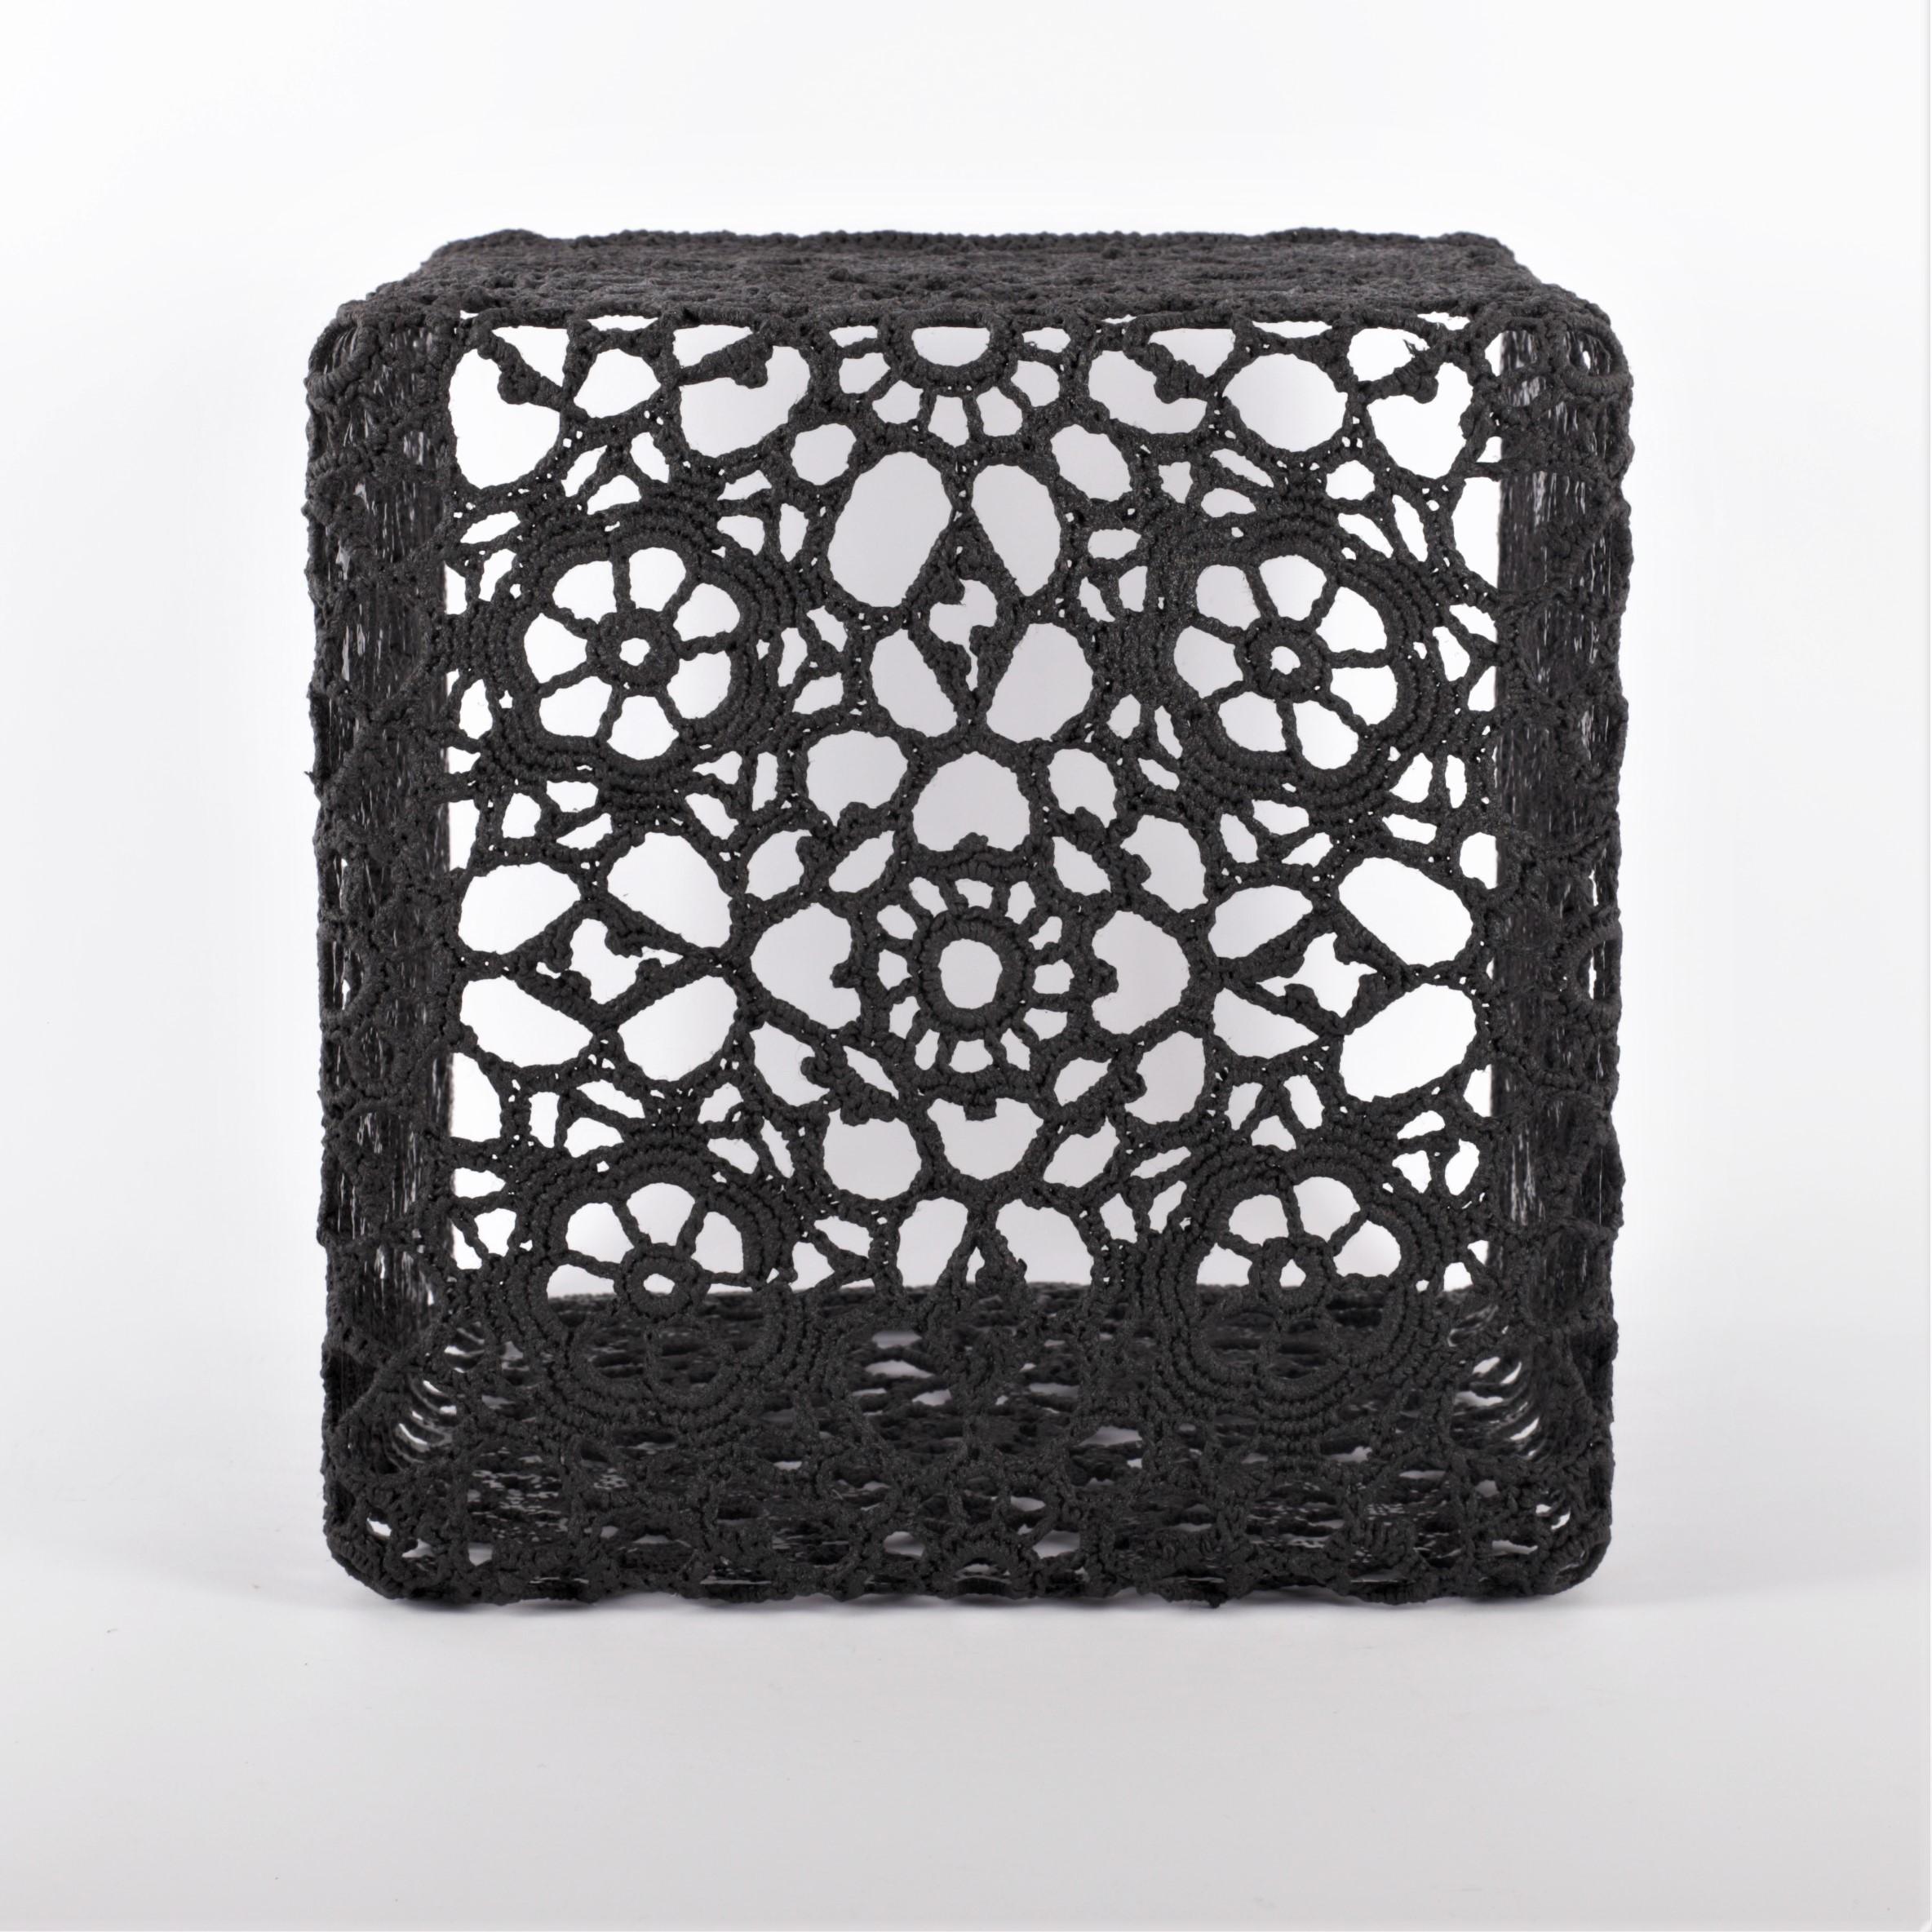 Rope Crochet Side Table, Special Black 3, by Marcel Wanders, 2007 For Sale